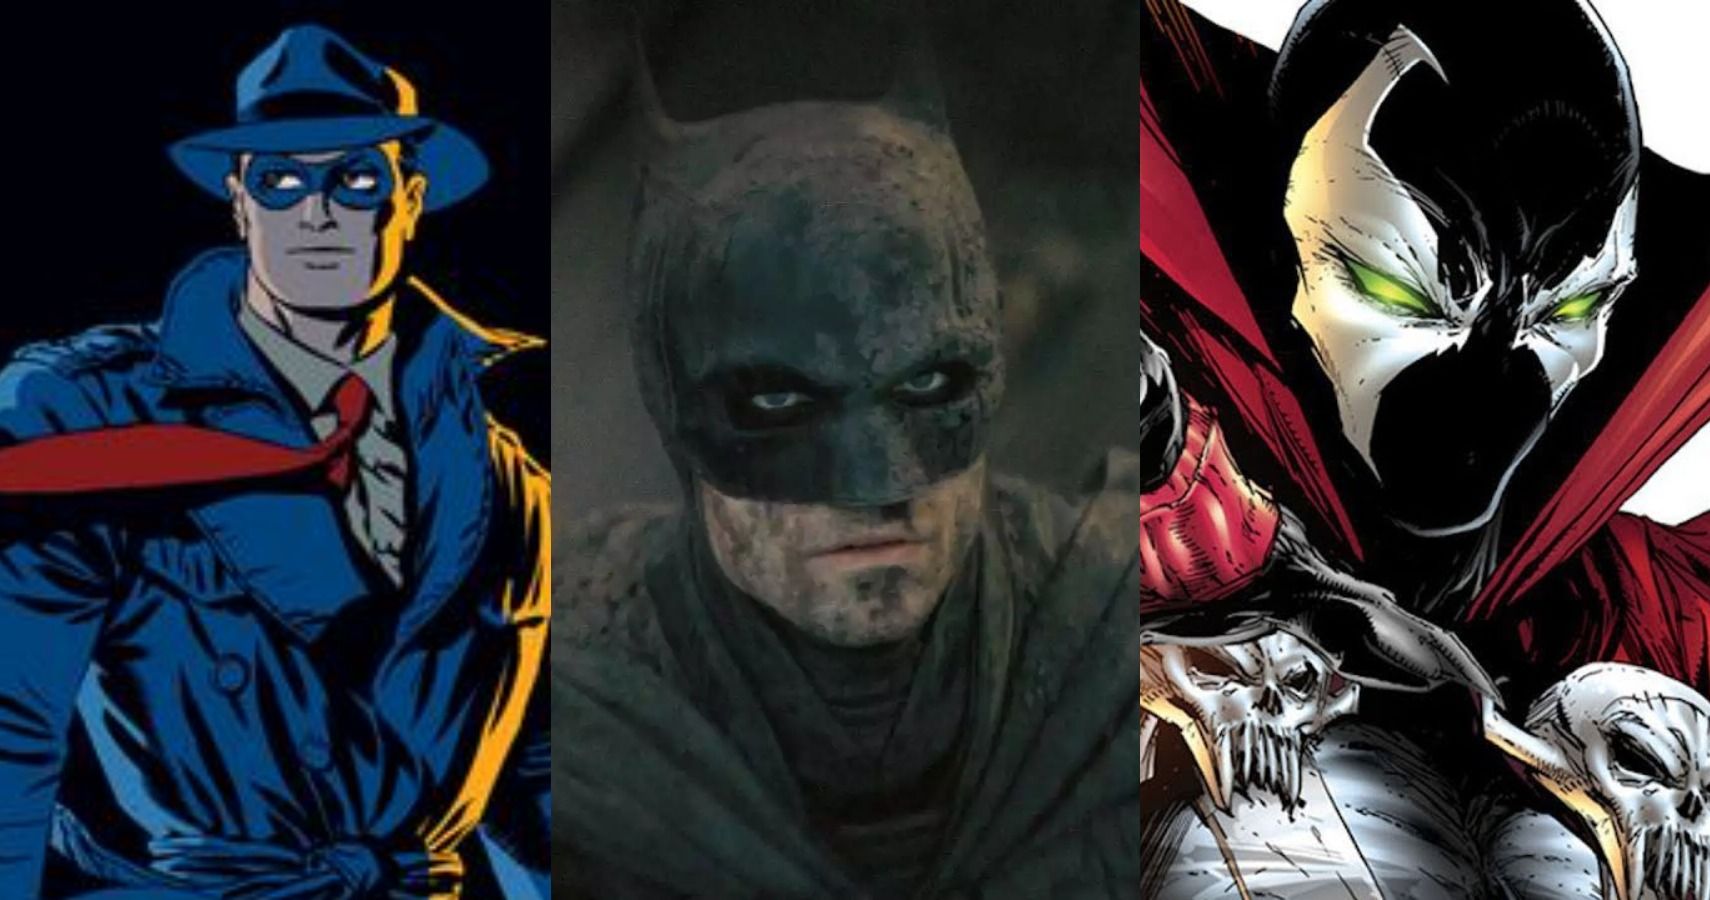 Robert Pattinson's Batman flanked by an image of The Spirit on the left and Spawn on the right.